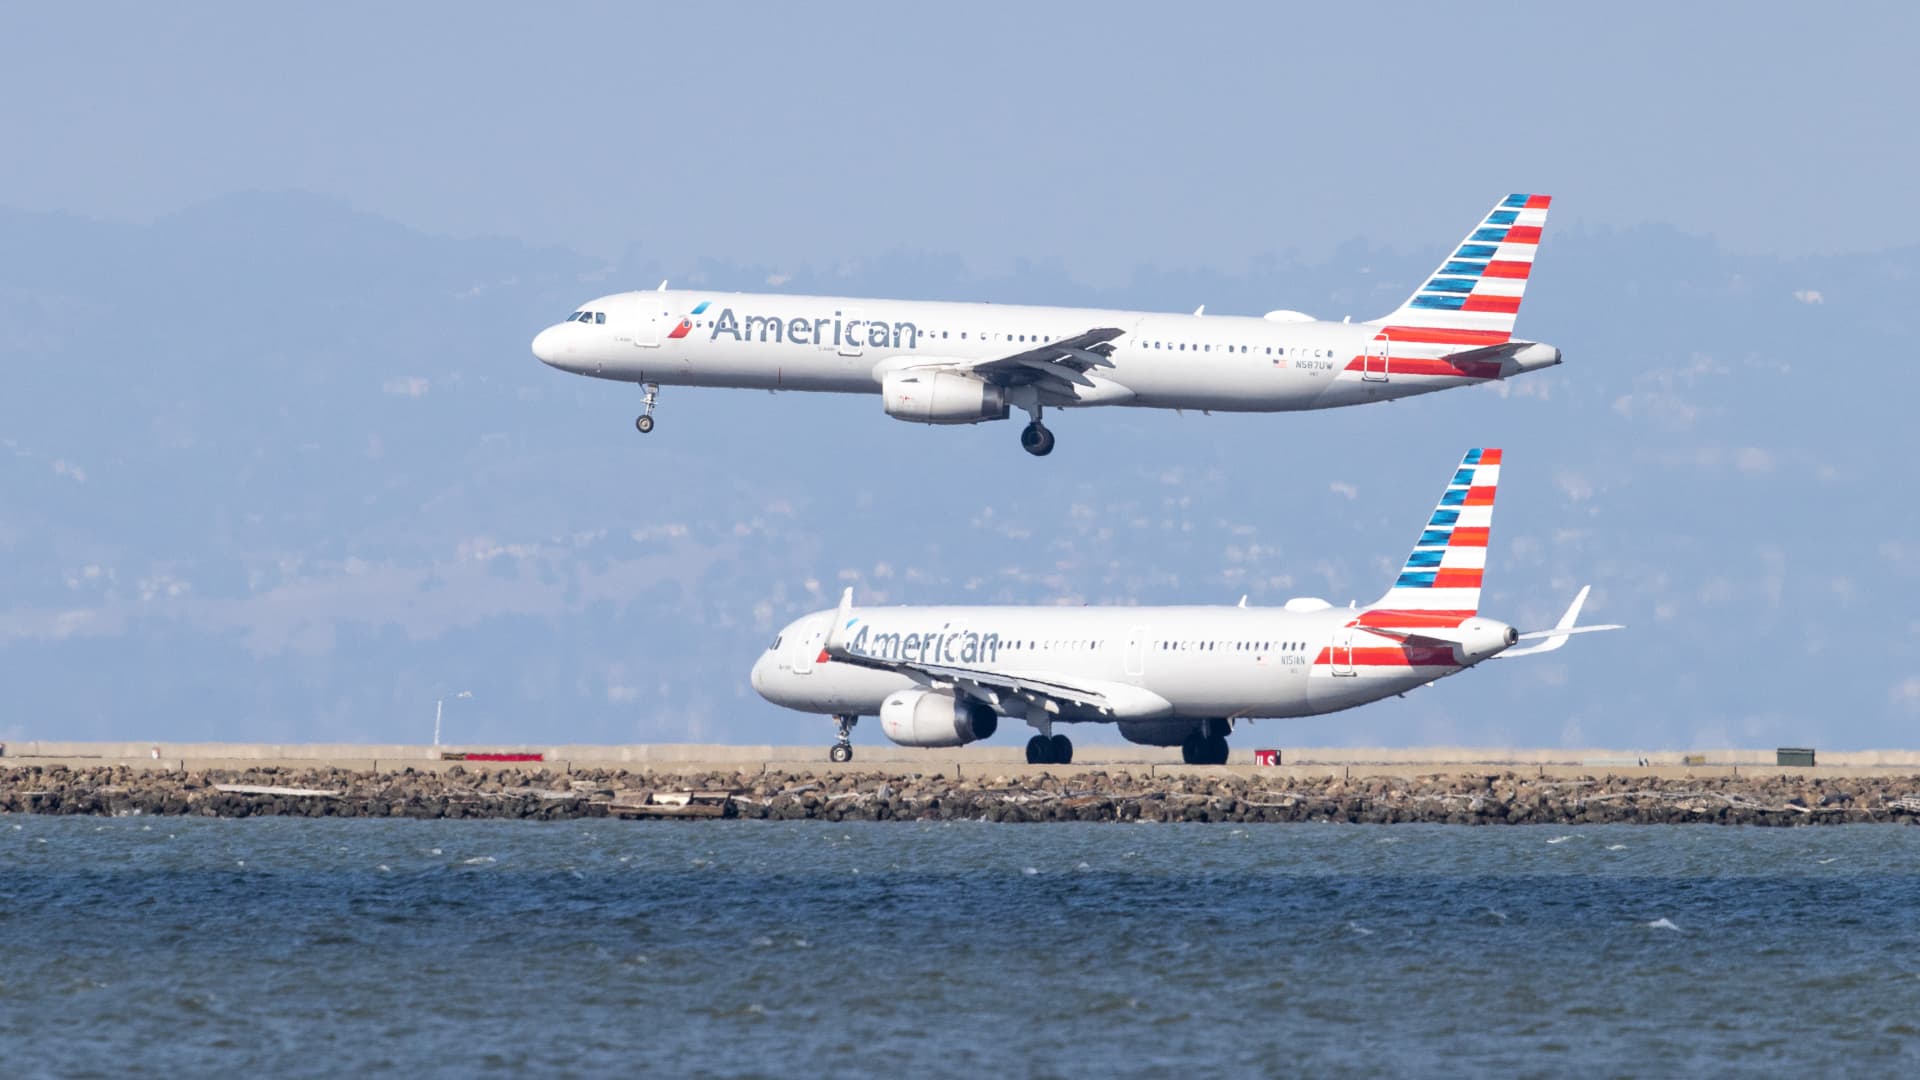 American Airlines will make it harder to earn frequent flyer status next year in loyalty program shake-up